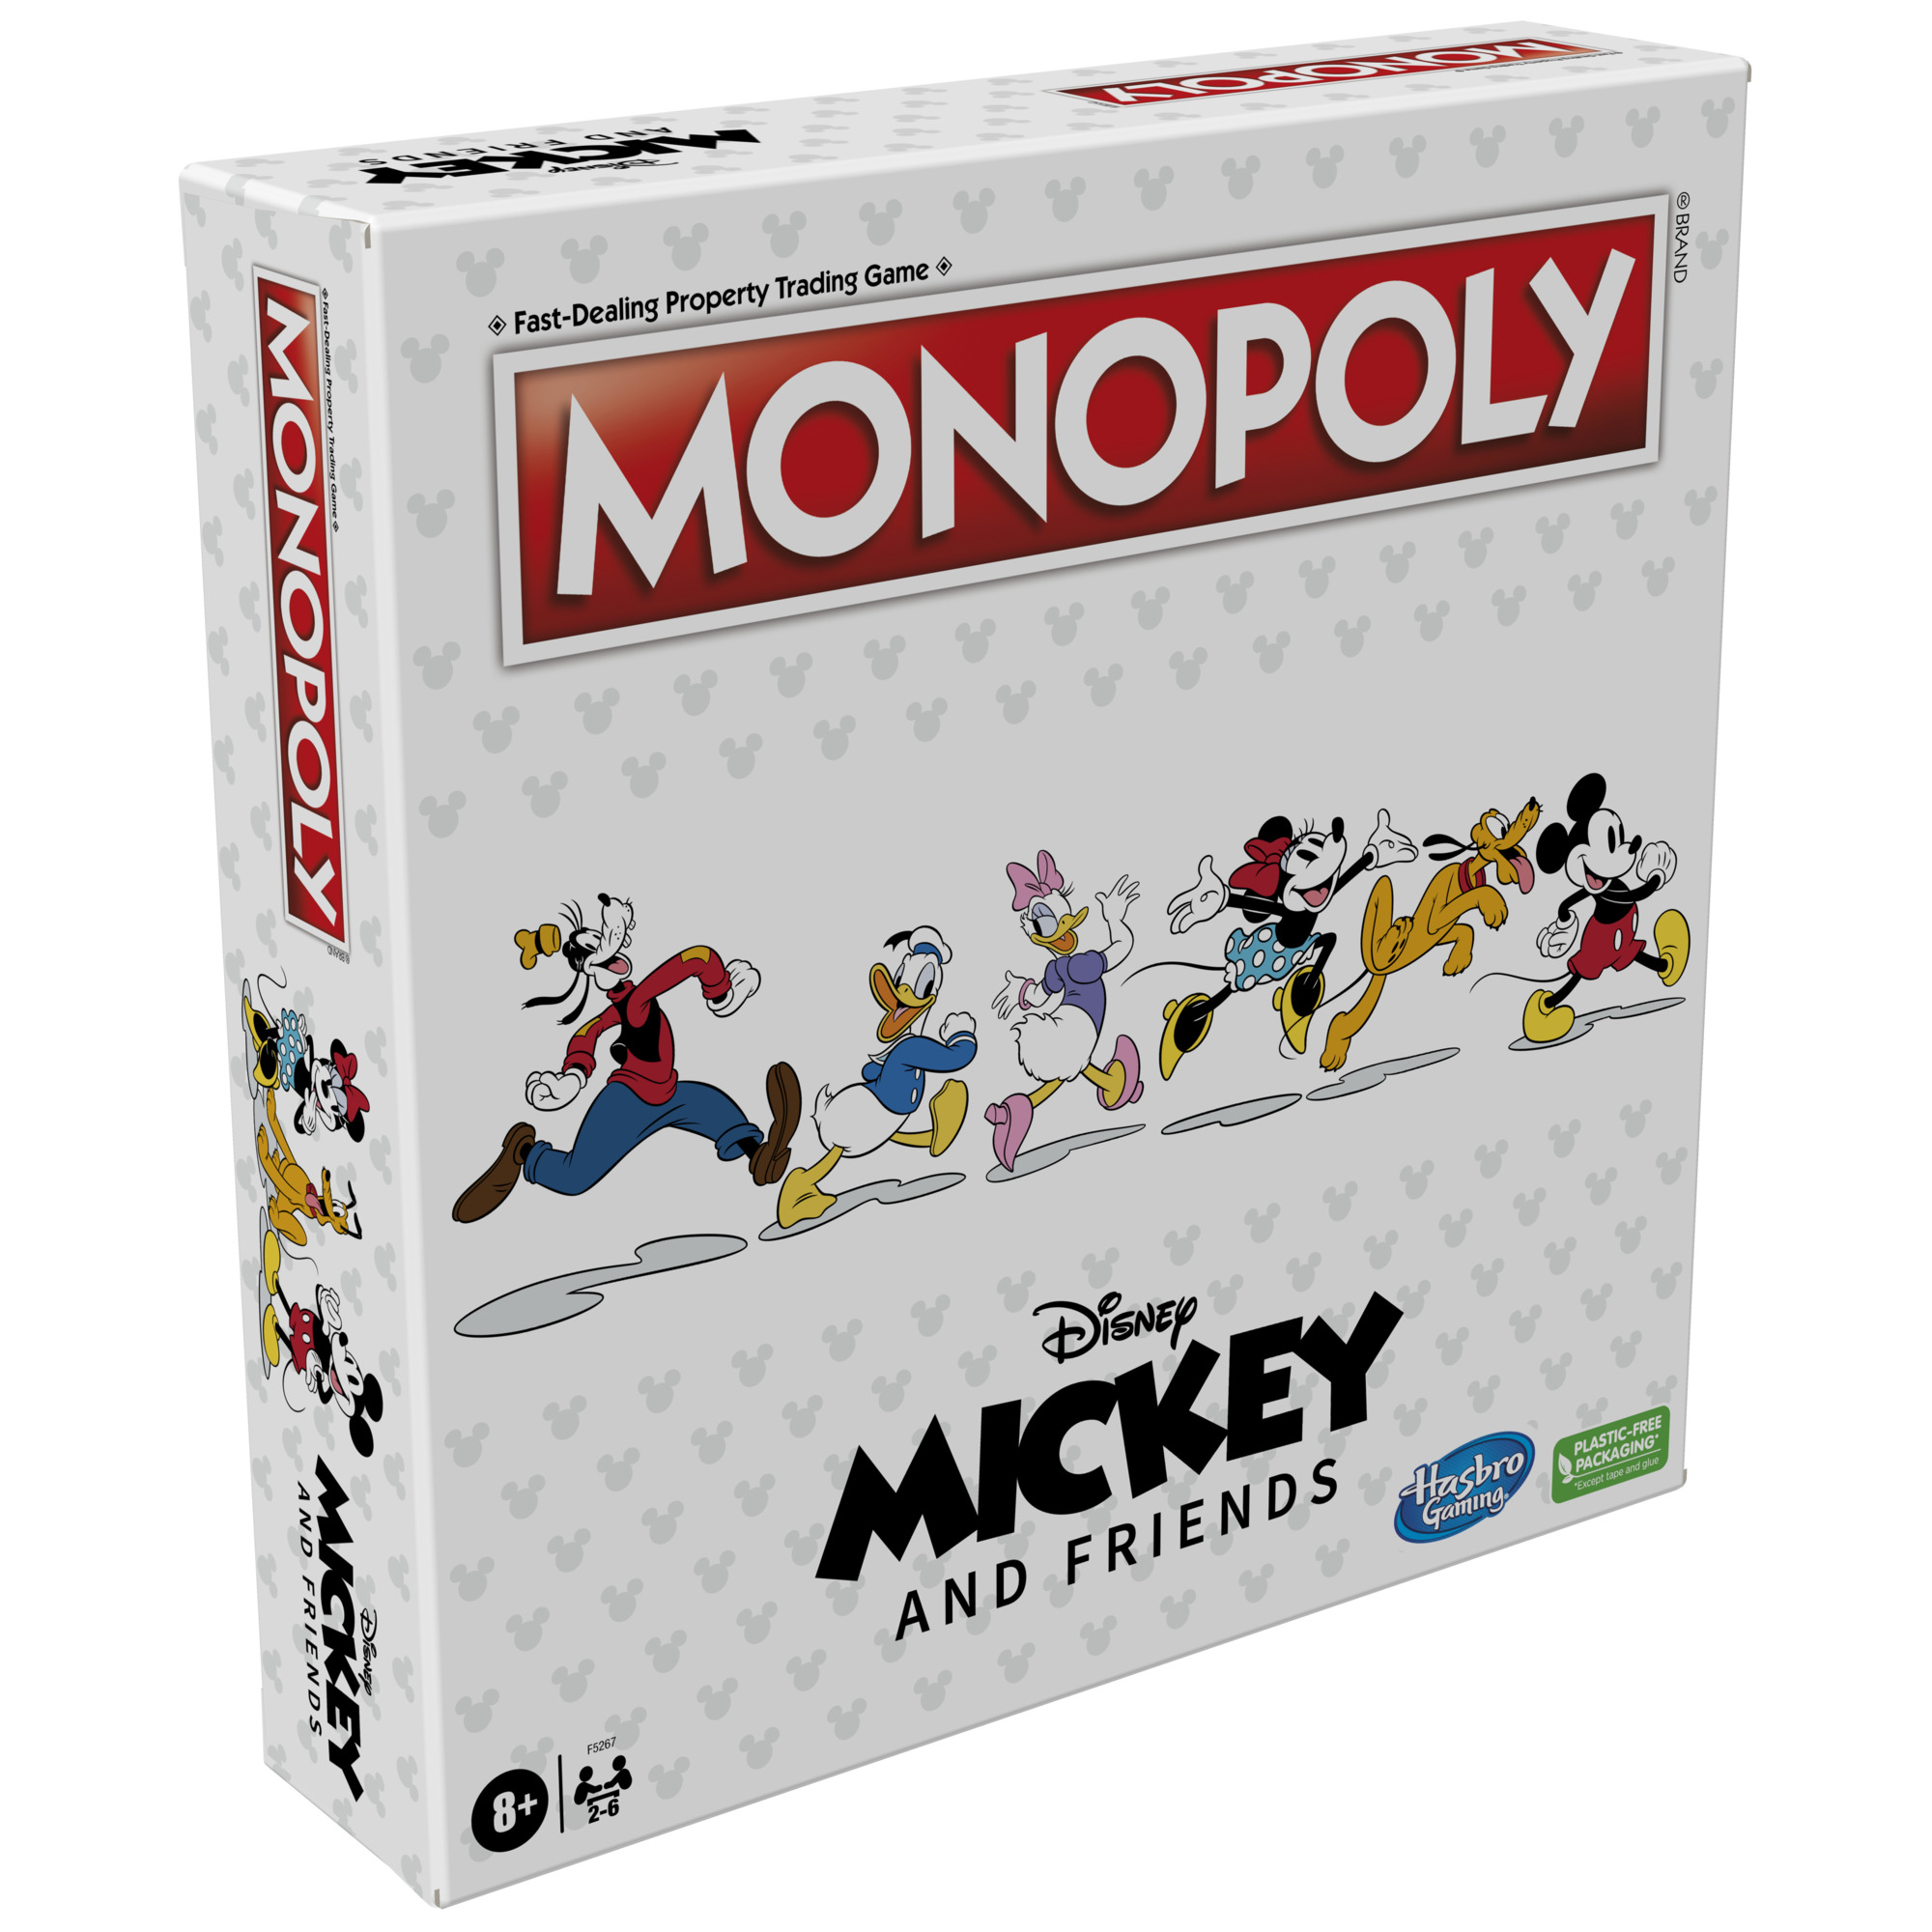 Monopoly Disney Mickey and Friends Edition Board Game for kids and Family Ages 8 and Up - image 7 of 7